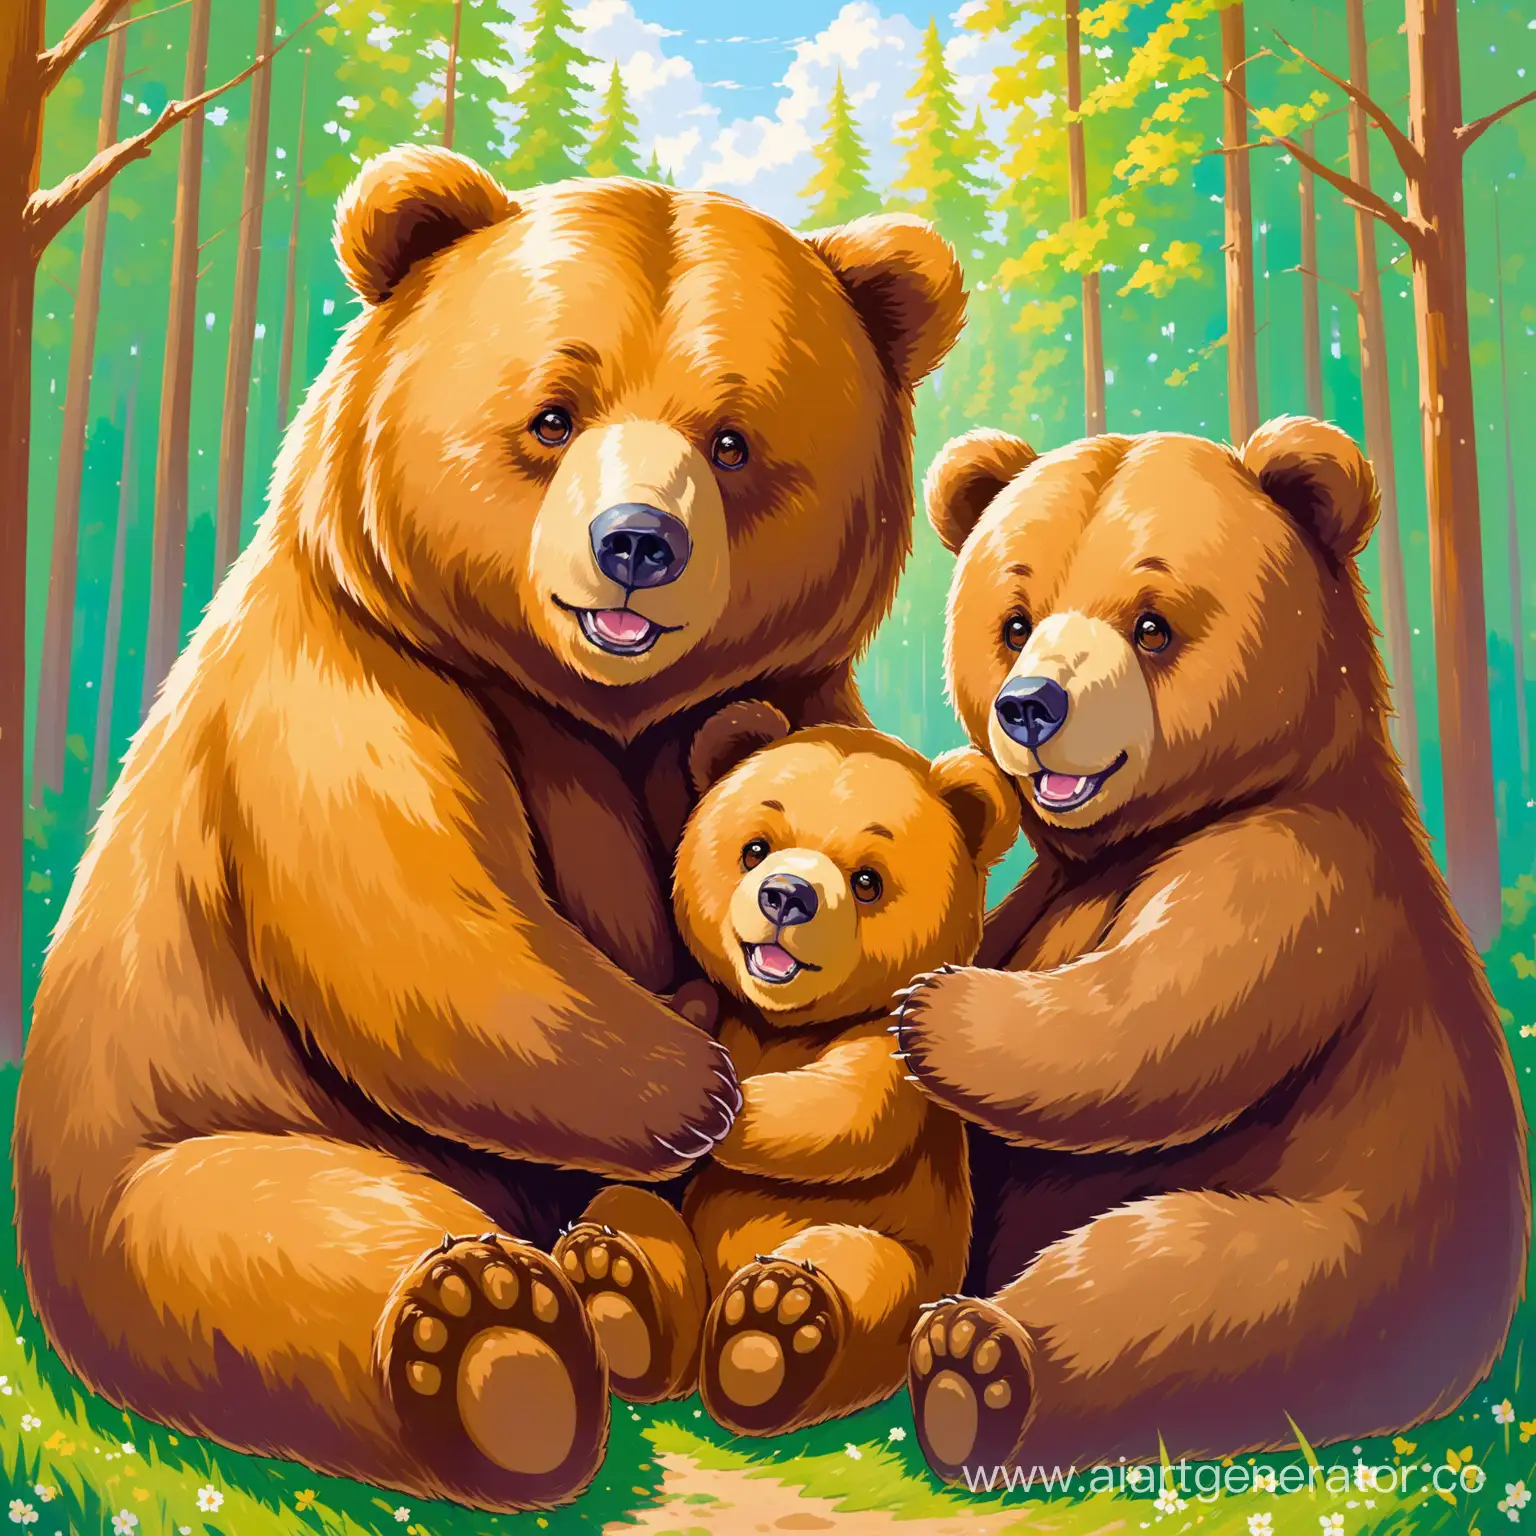 Three-Bears-in-a-Serene-Forest-Painting